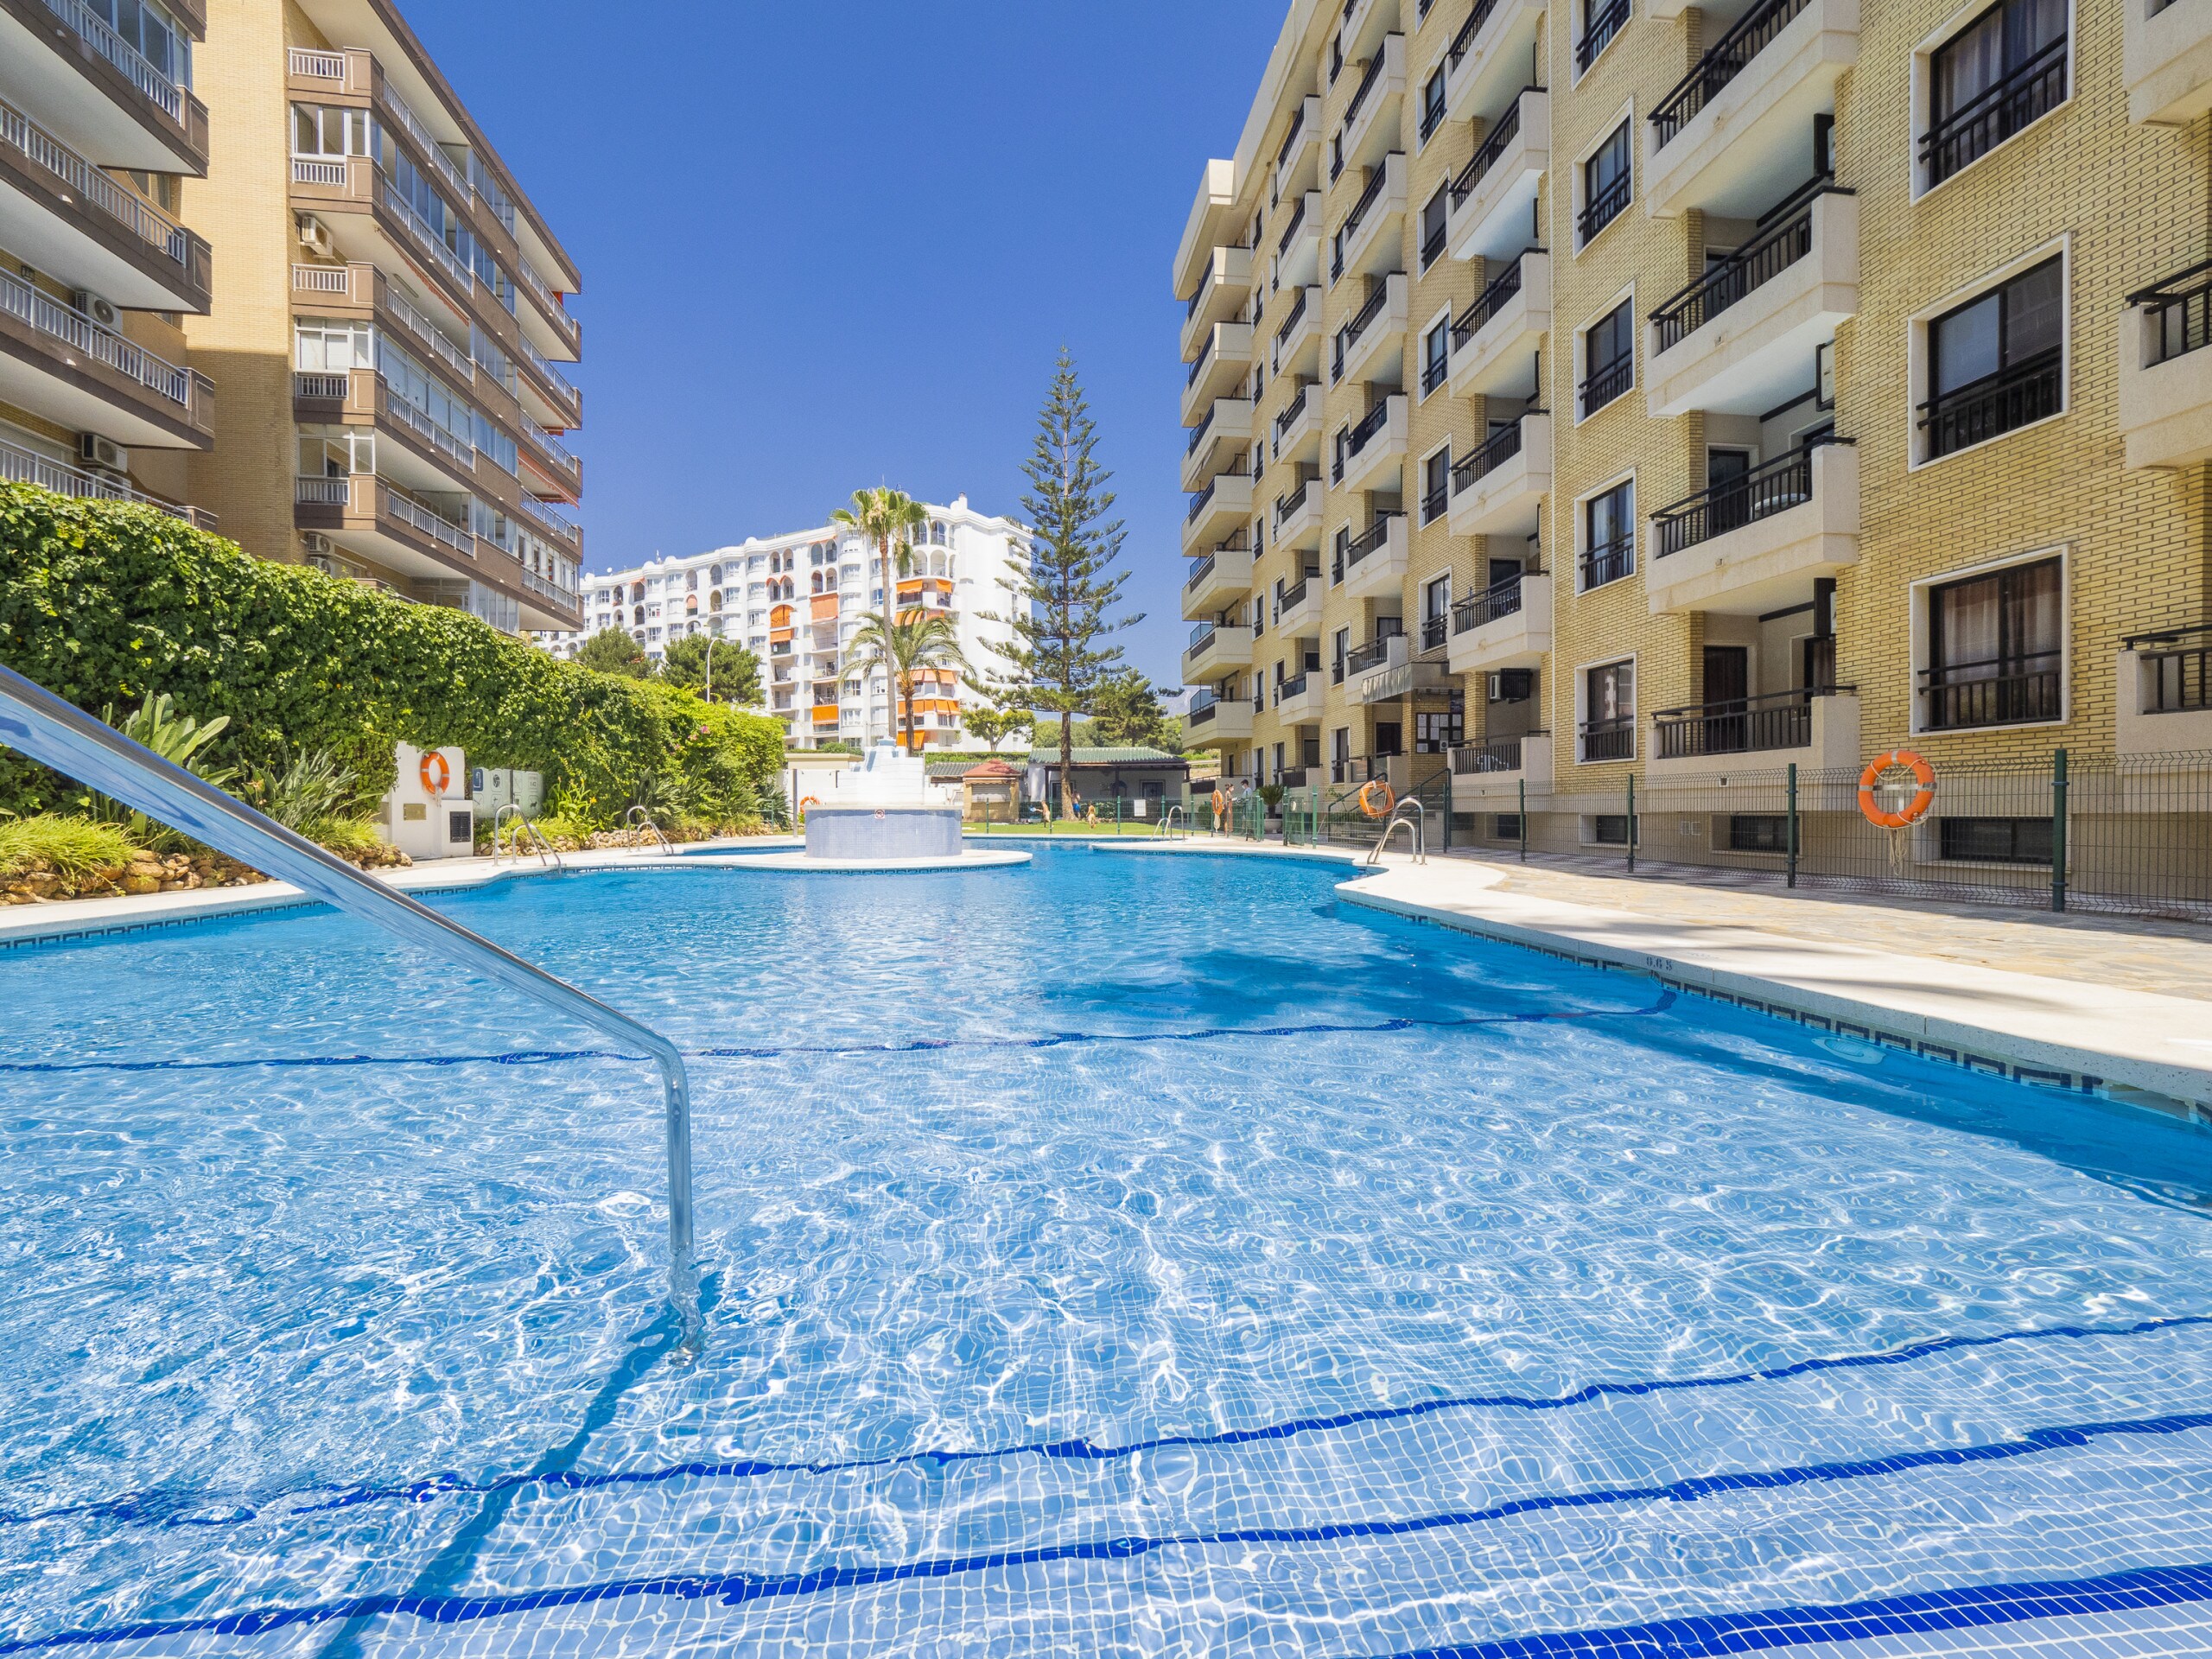 Enjoy the pool of this apartment in Fuengirola